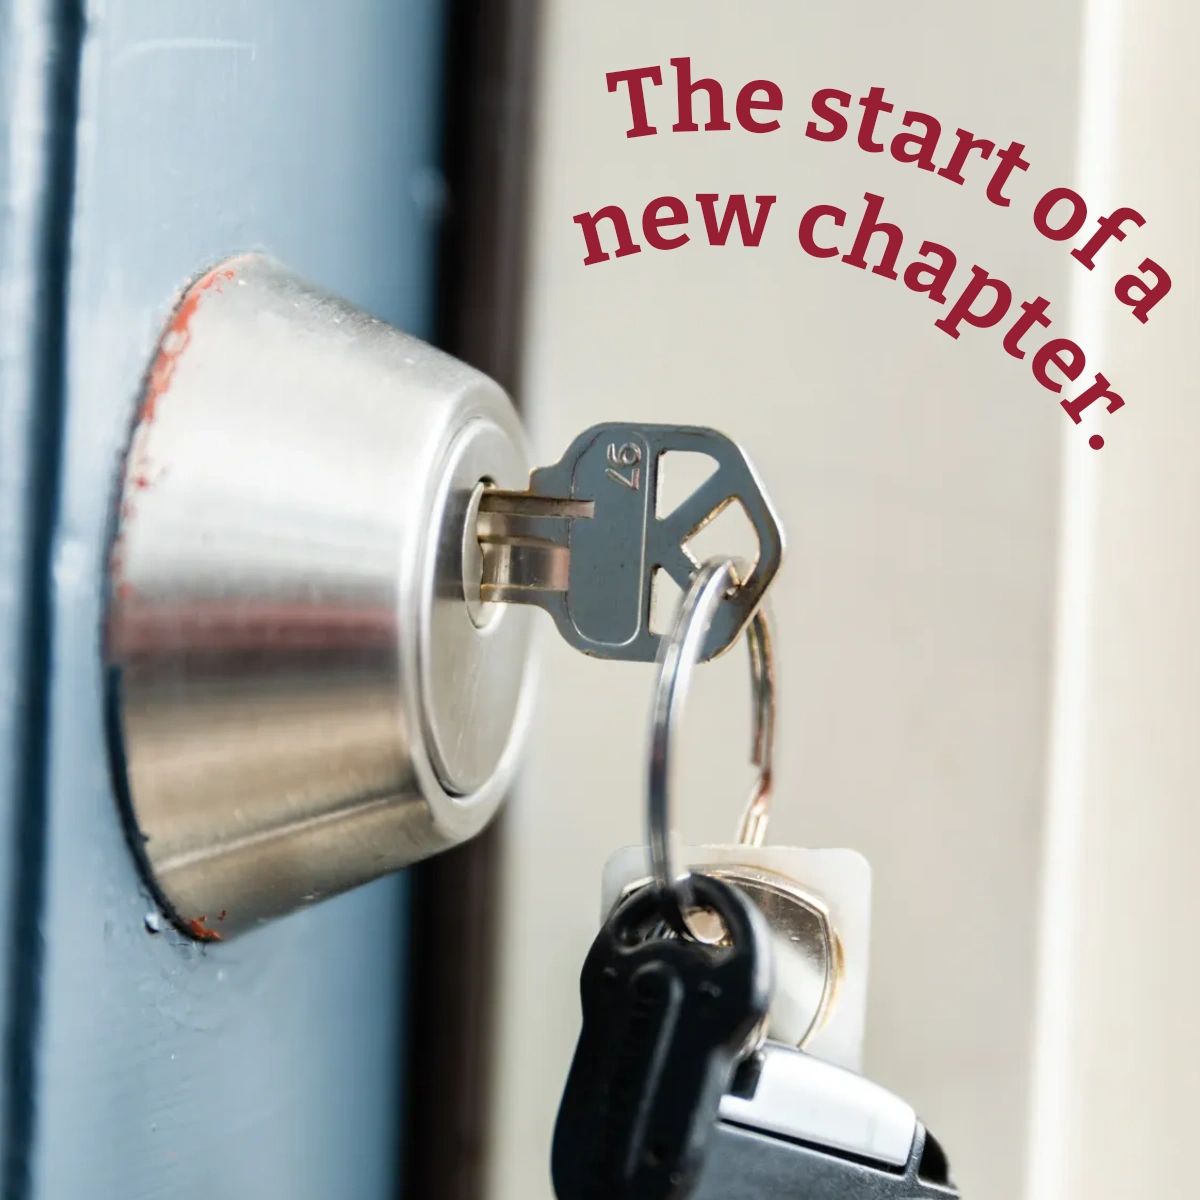 When one door closes, another one opens. I will be right beside you to hand you the keys when that happens! #TheBrattonRealEstateTeam #RemaxFirst #RealEstate #realty #OklahomaRealEstate #OklahomaCityRealEstate